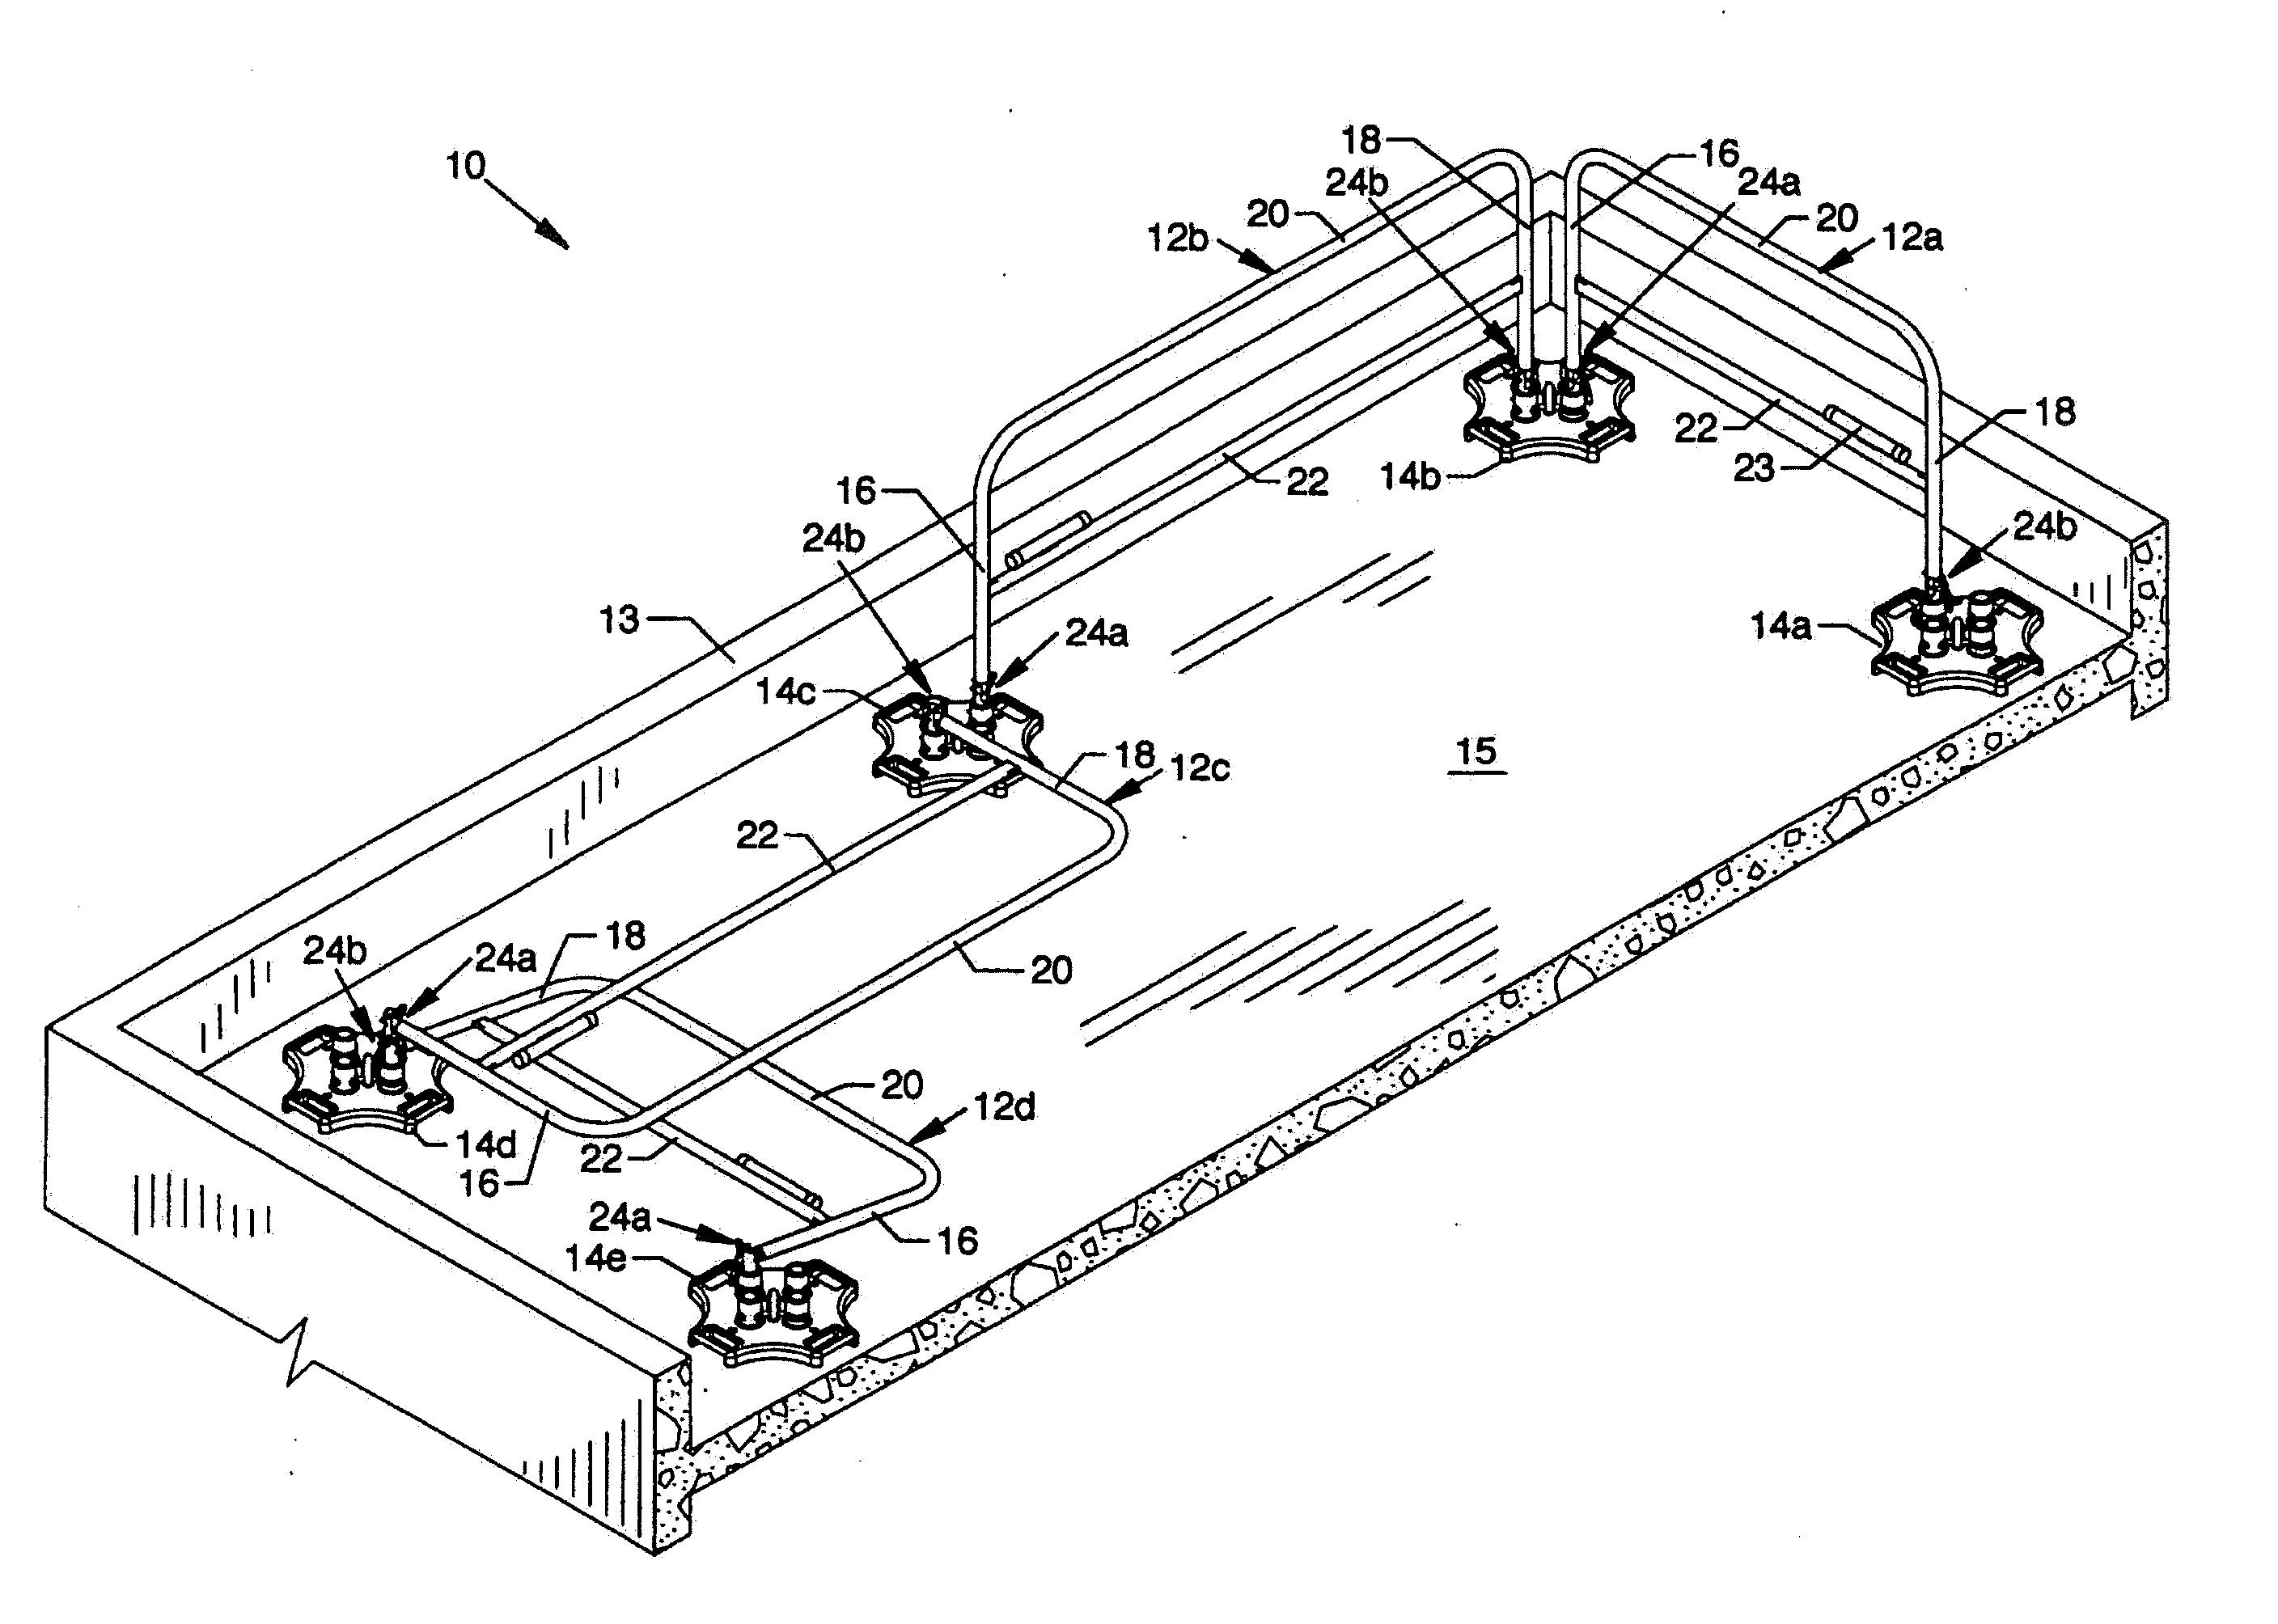 Collapsible safety rail system